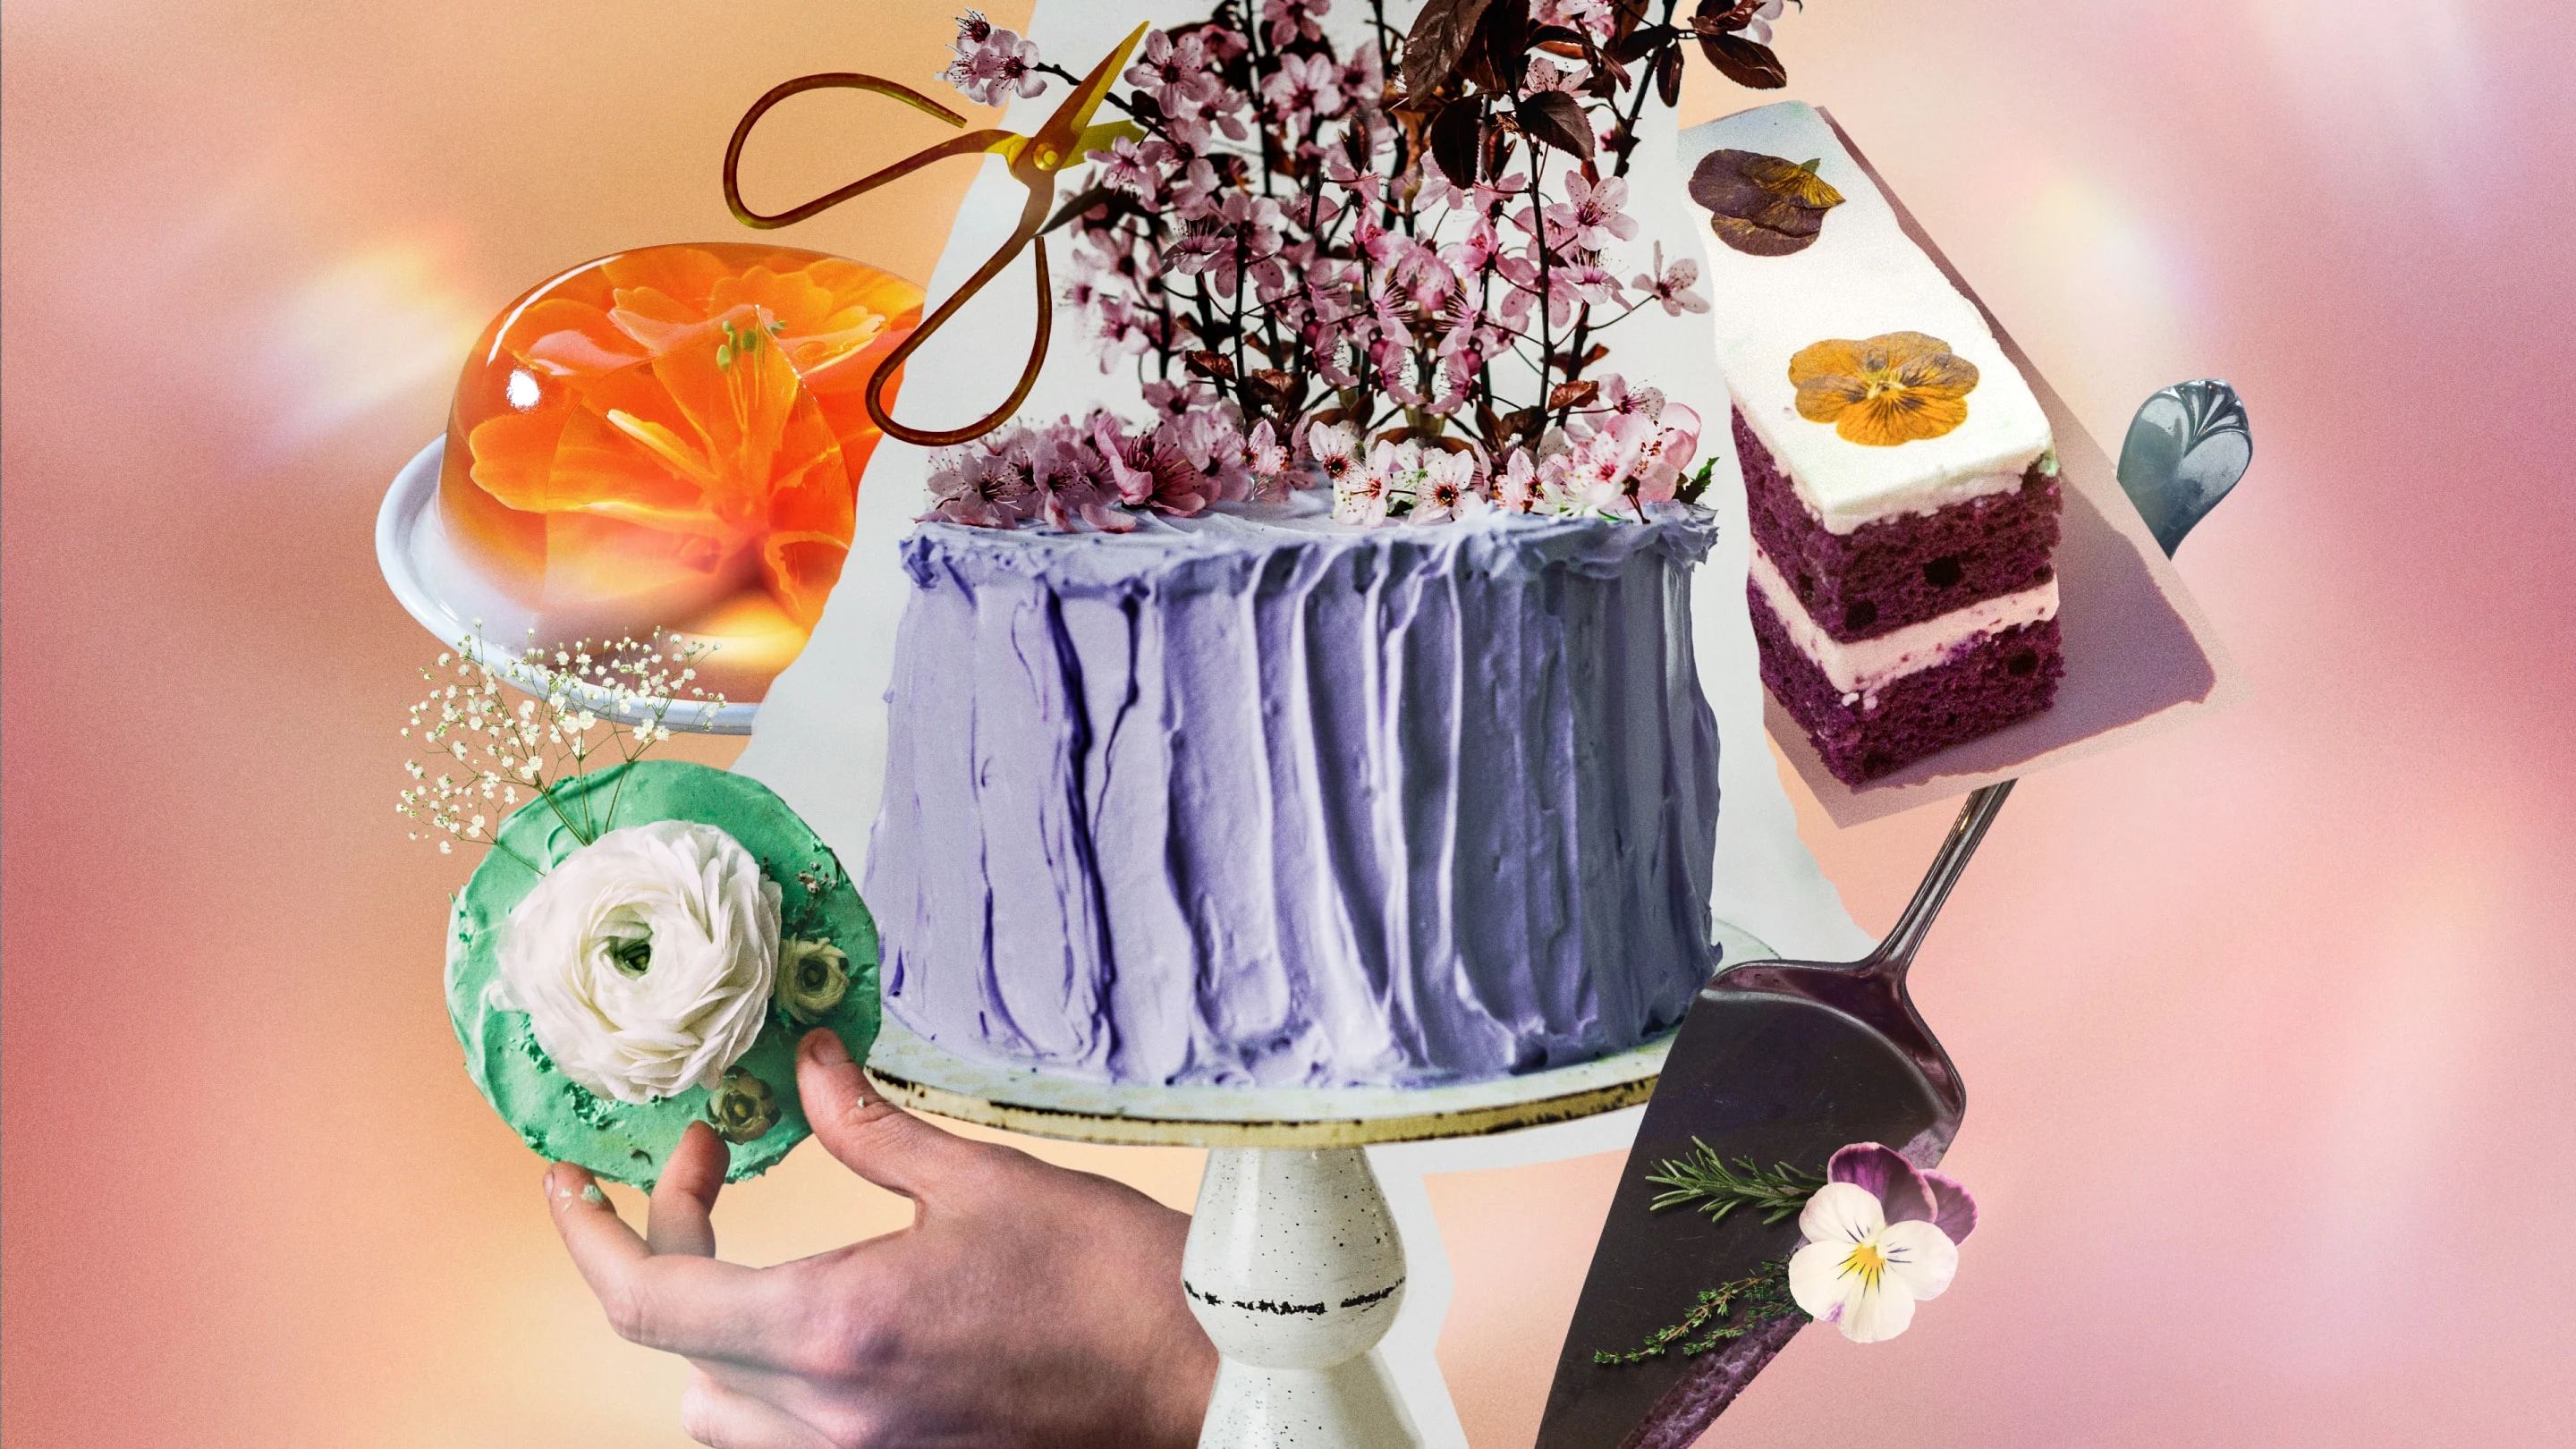 An assortment of cakes and cake slices adorned with wild flowers in various styles.